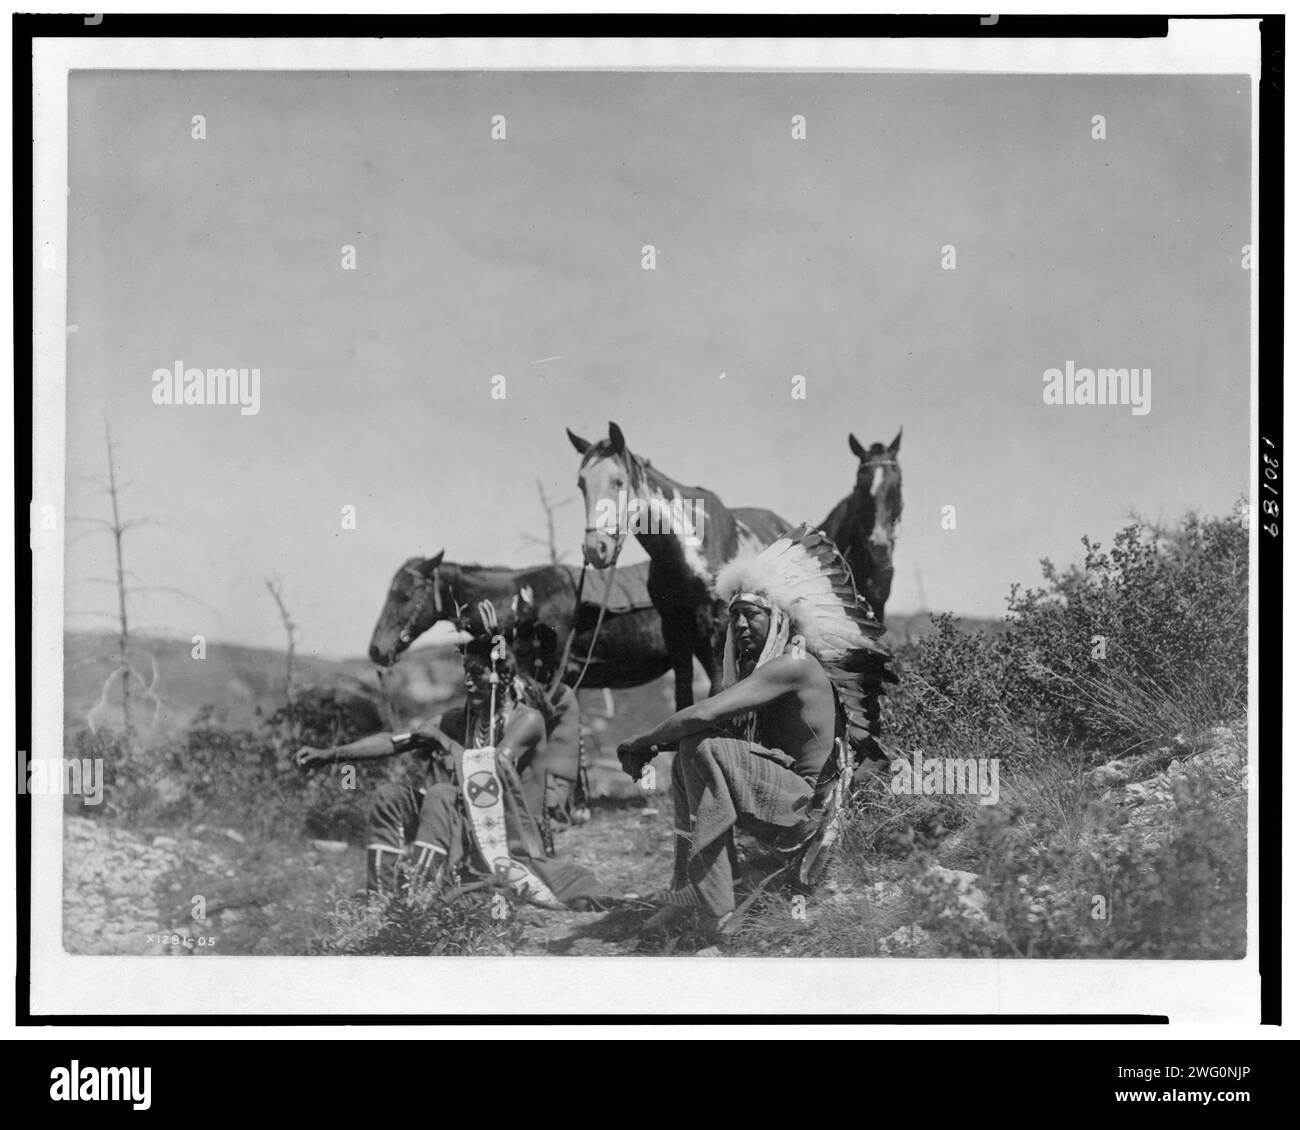 The Talk, c1905. Three Crow men, seated in rocky area with low growing shrubs, their horses rest nearby. Stock Photo